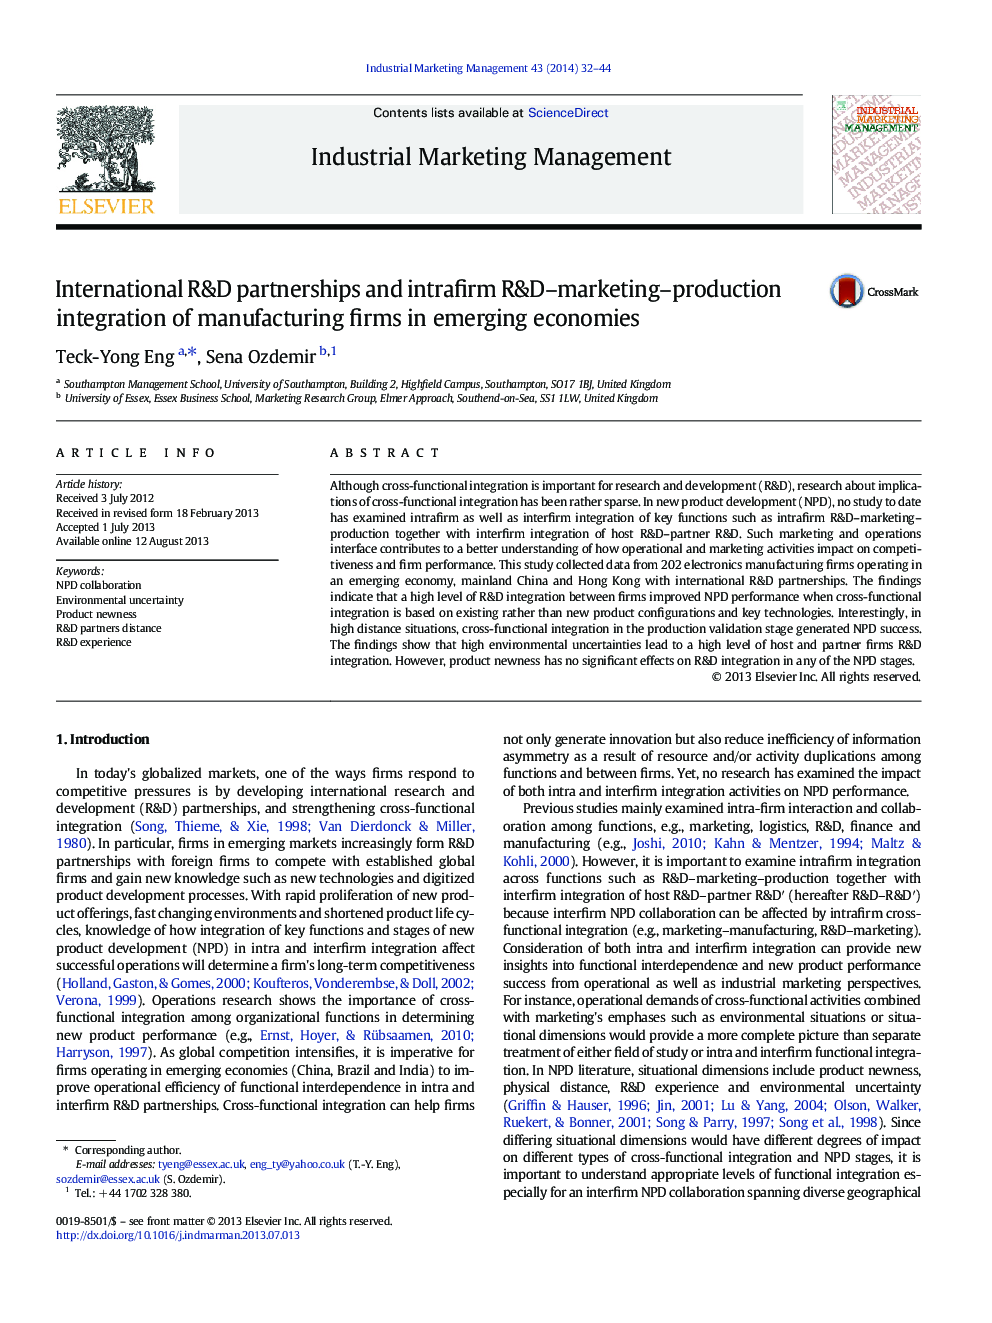 International R&D partnerships and intrafirm R&D–marketing–production integration of manufacturing firms in emerging economies